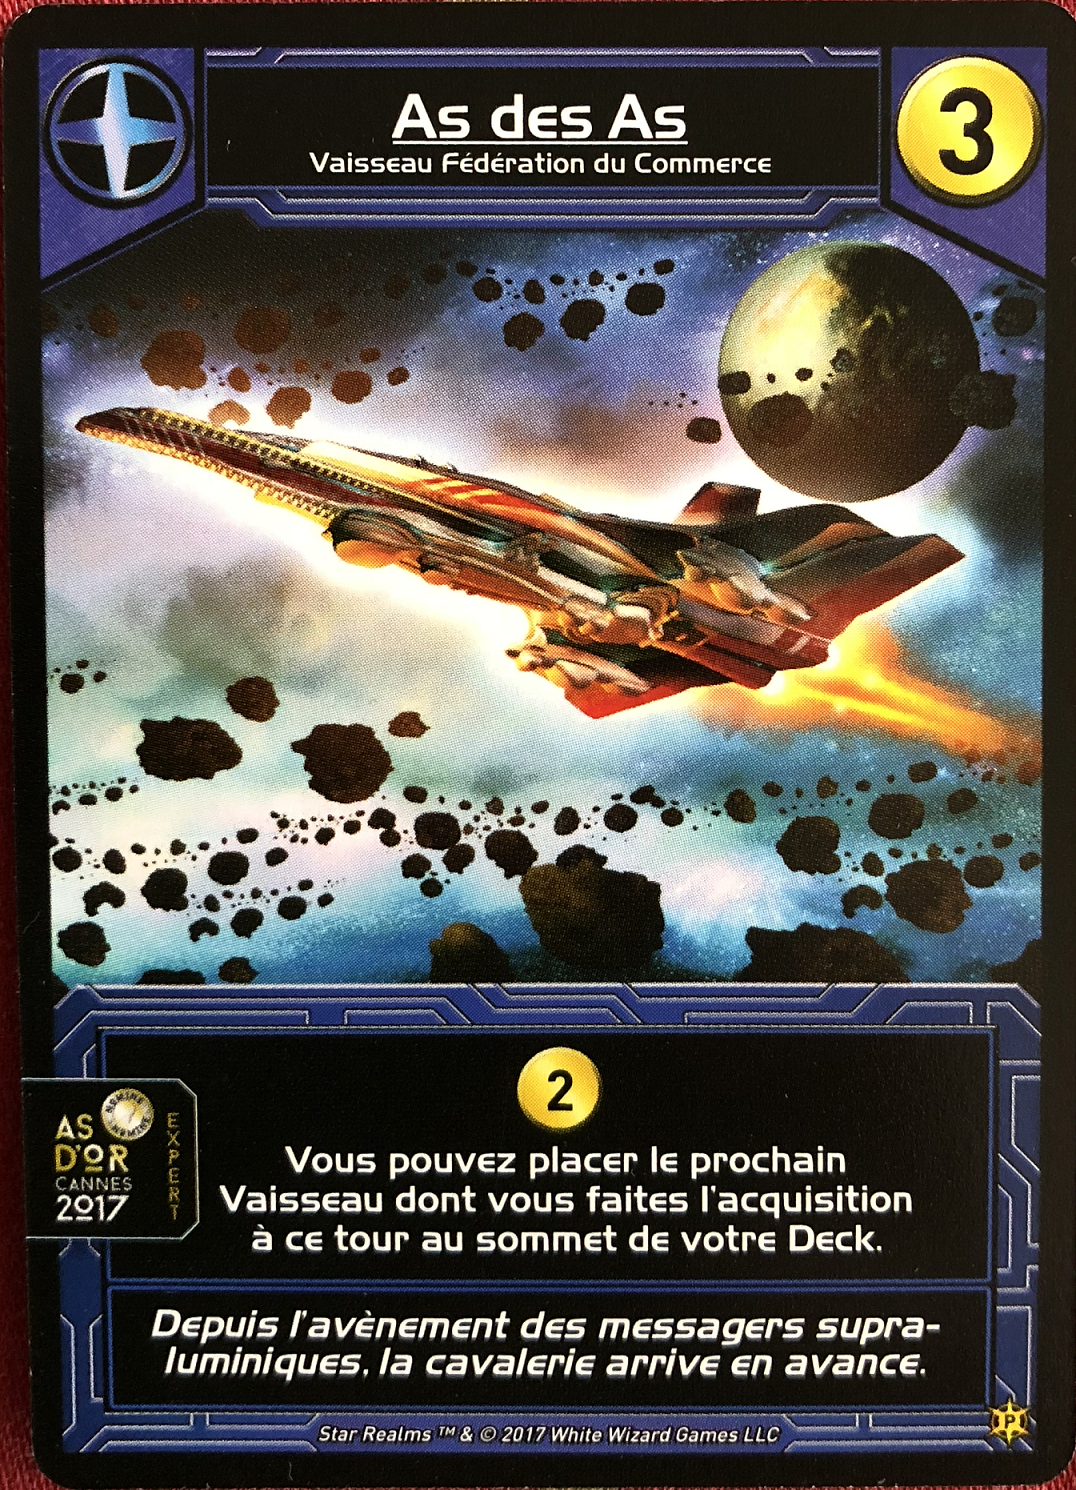 star realms - as des as (as d'or cannes 2017)